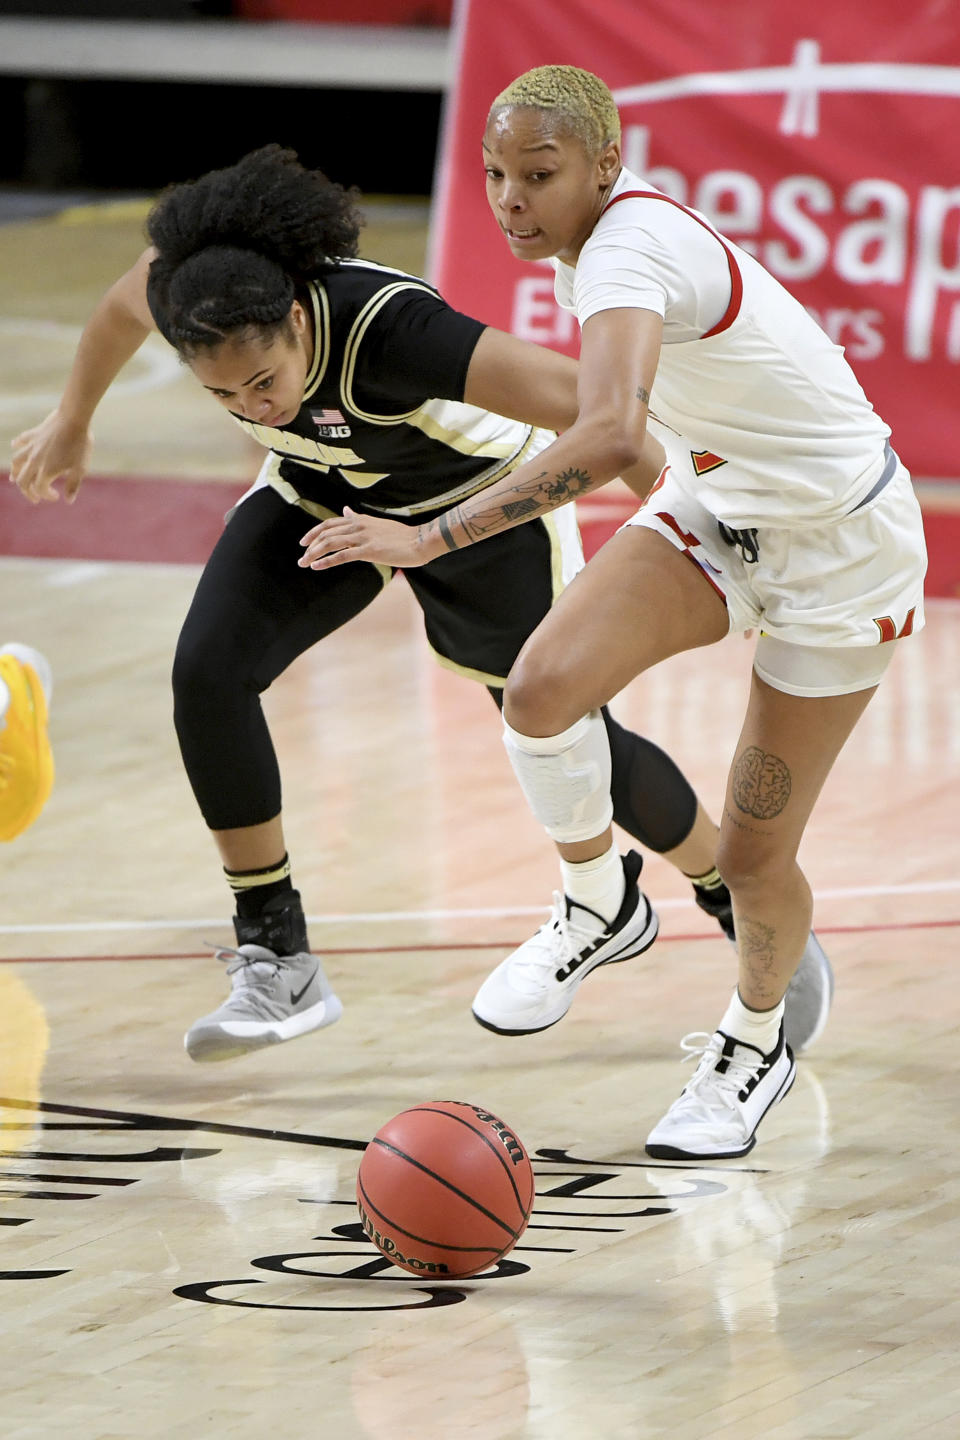 Purdue guard Jenelle Grant (22) and Maryland forward Alaysia Styles (5) go after a loose ball during the second half of an NCAA college basketball game, Sunday, Jan. 10, 2021, in College Park, Md. (AP Photo/Will Newton)